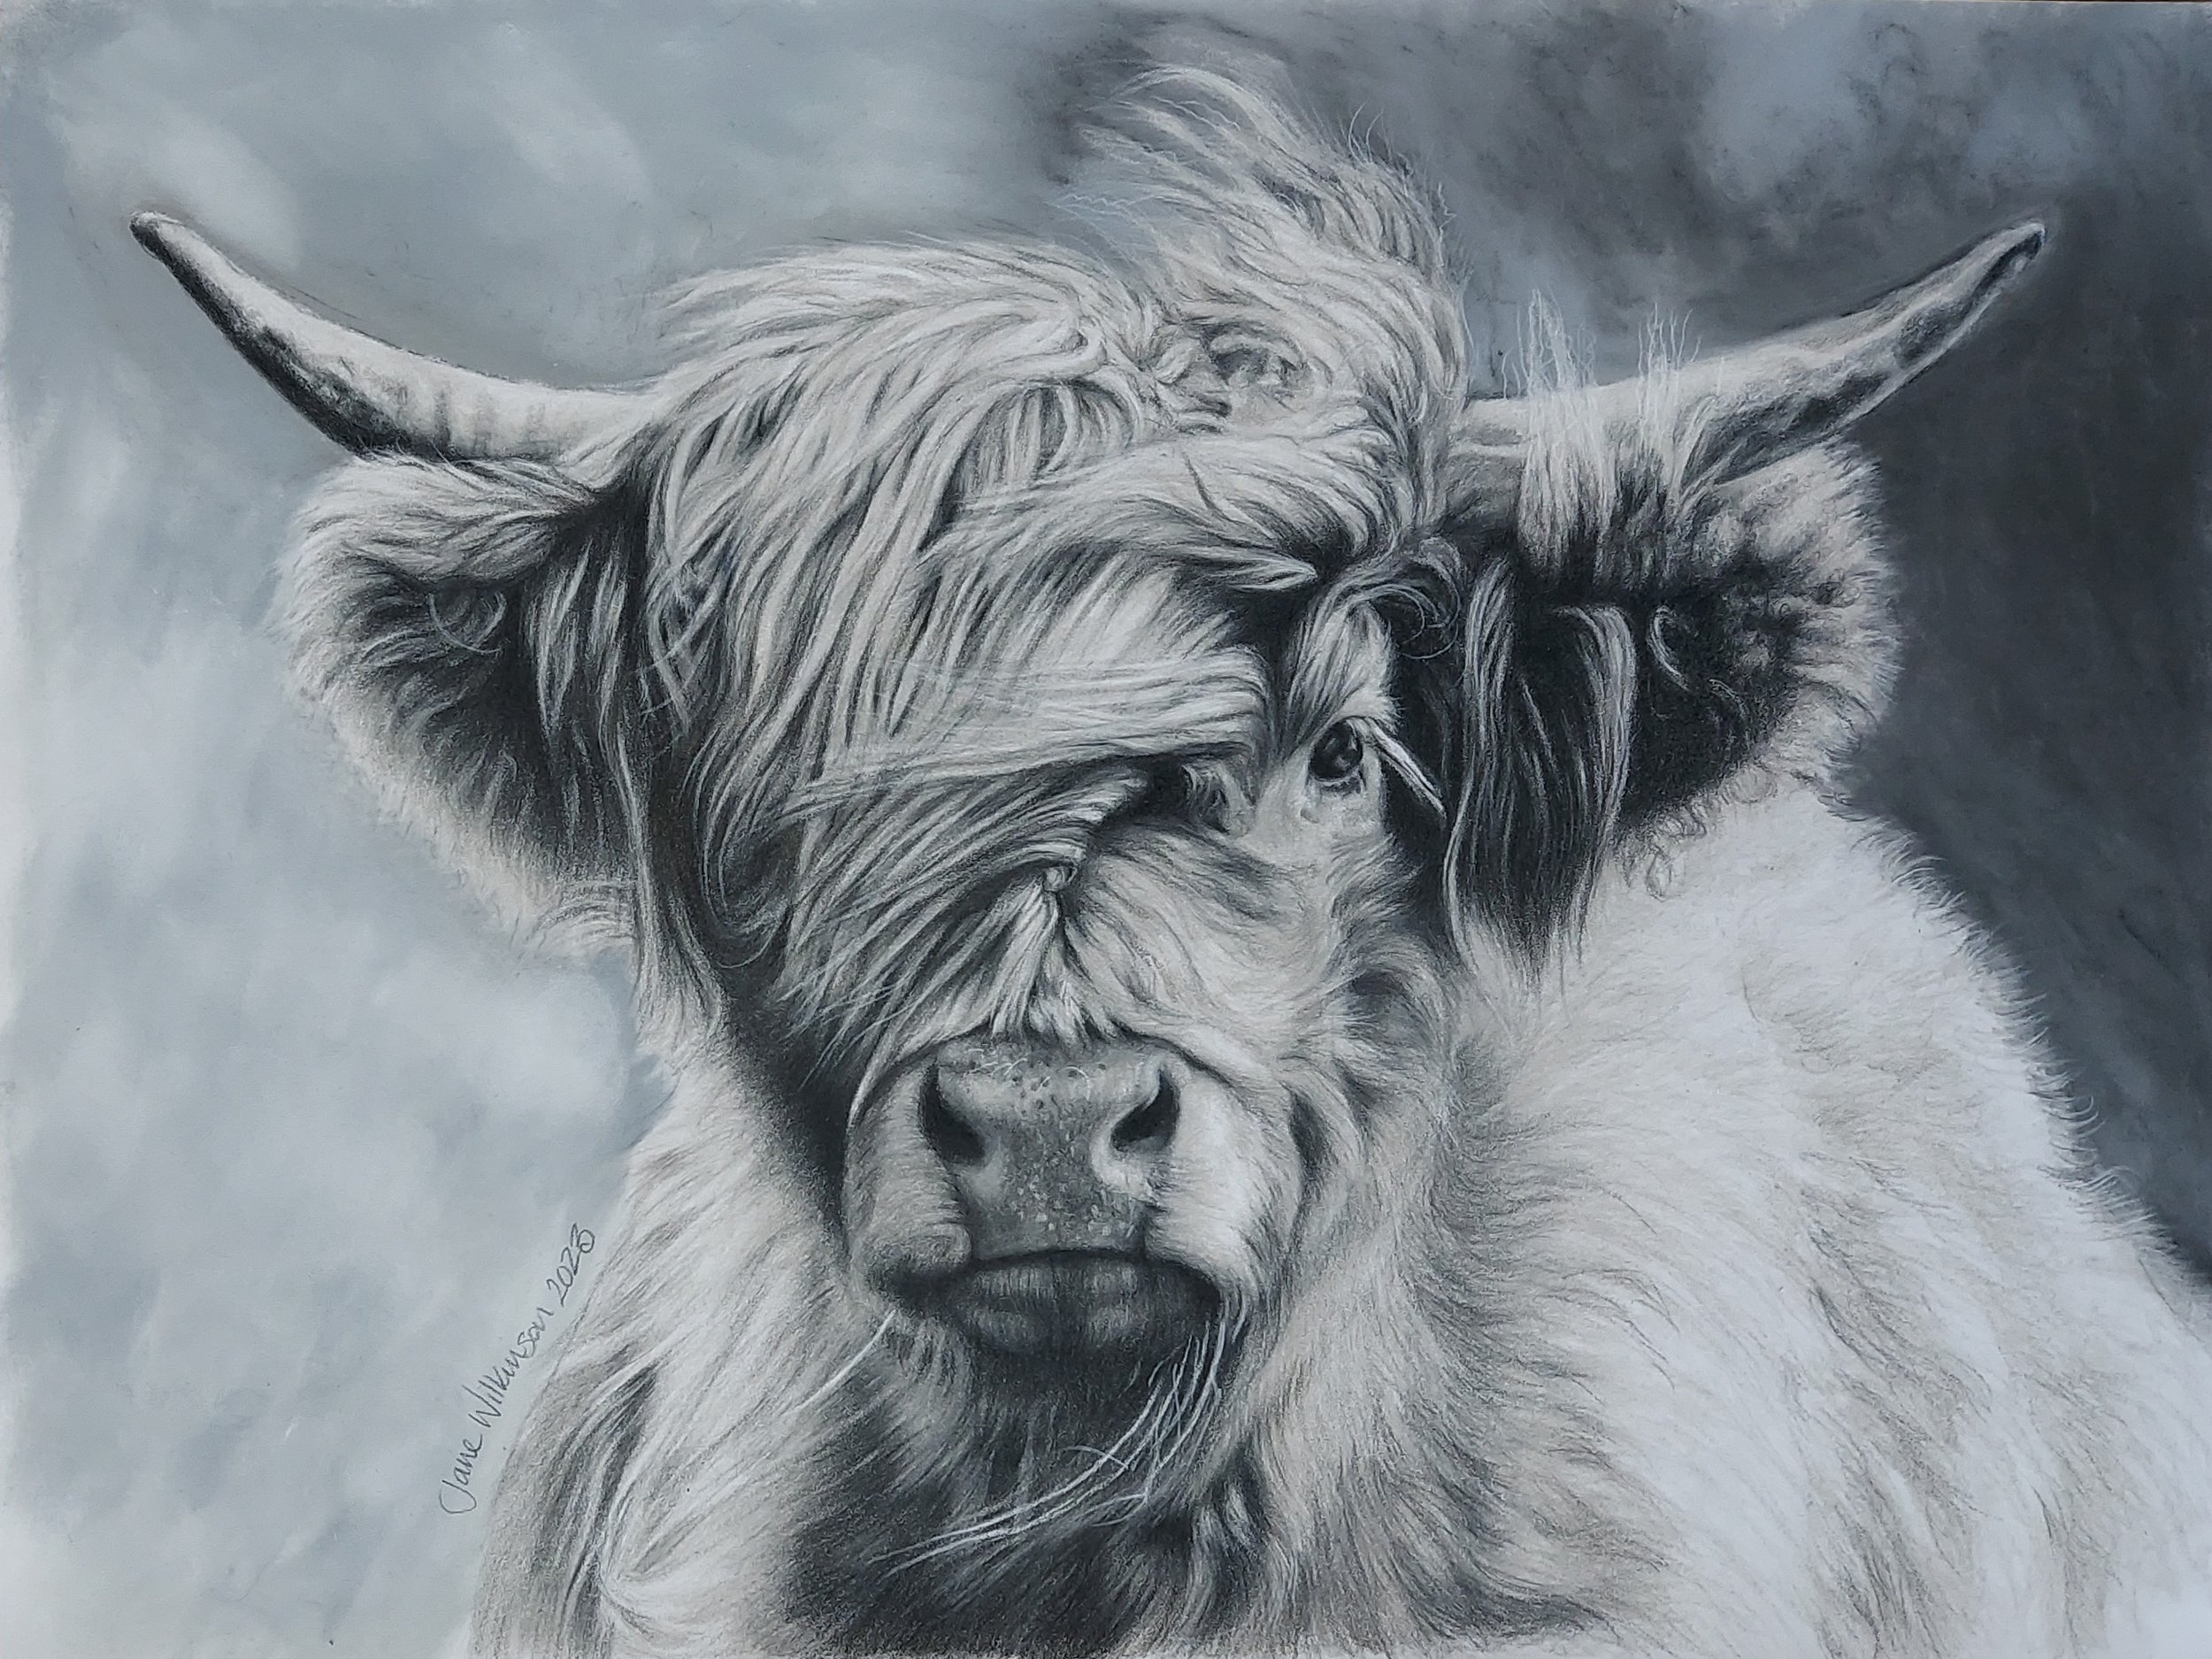 Wilkinson Jane   Highland Cow   Coloured pencil and pastel   11 x 14 inches.jpg